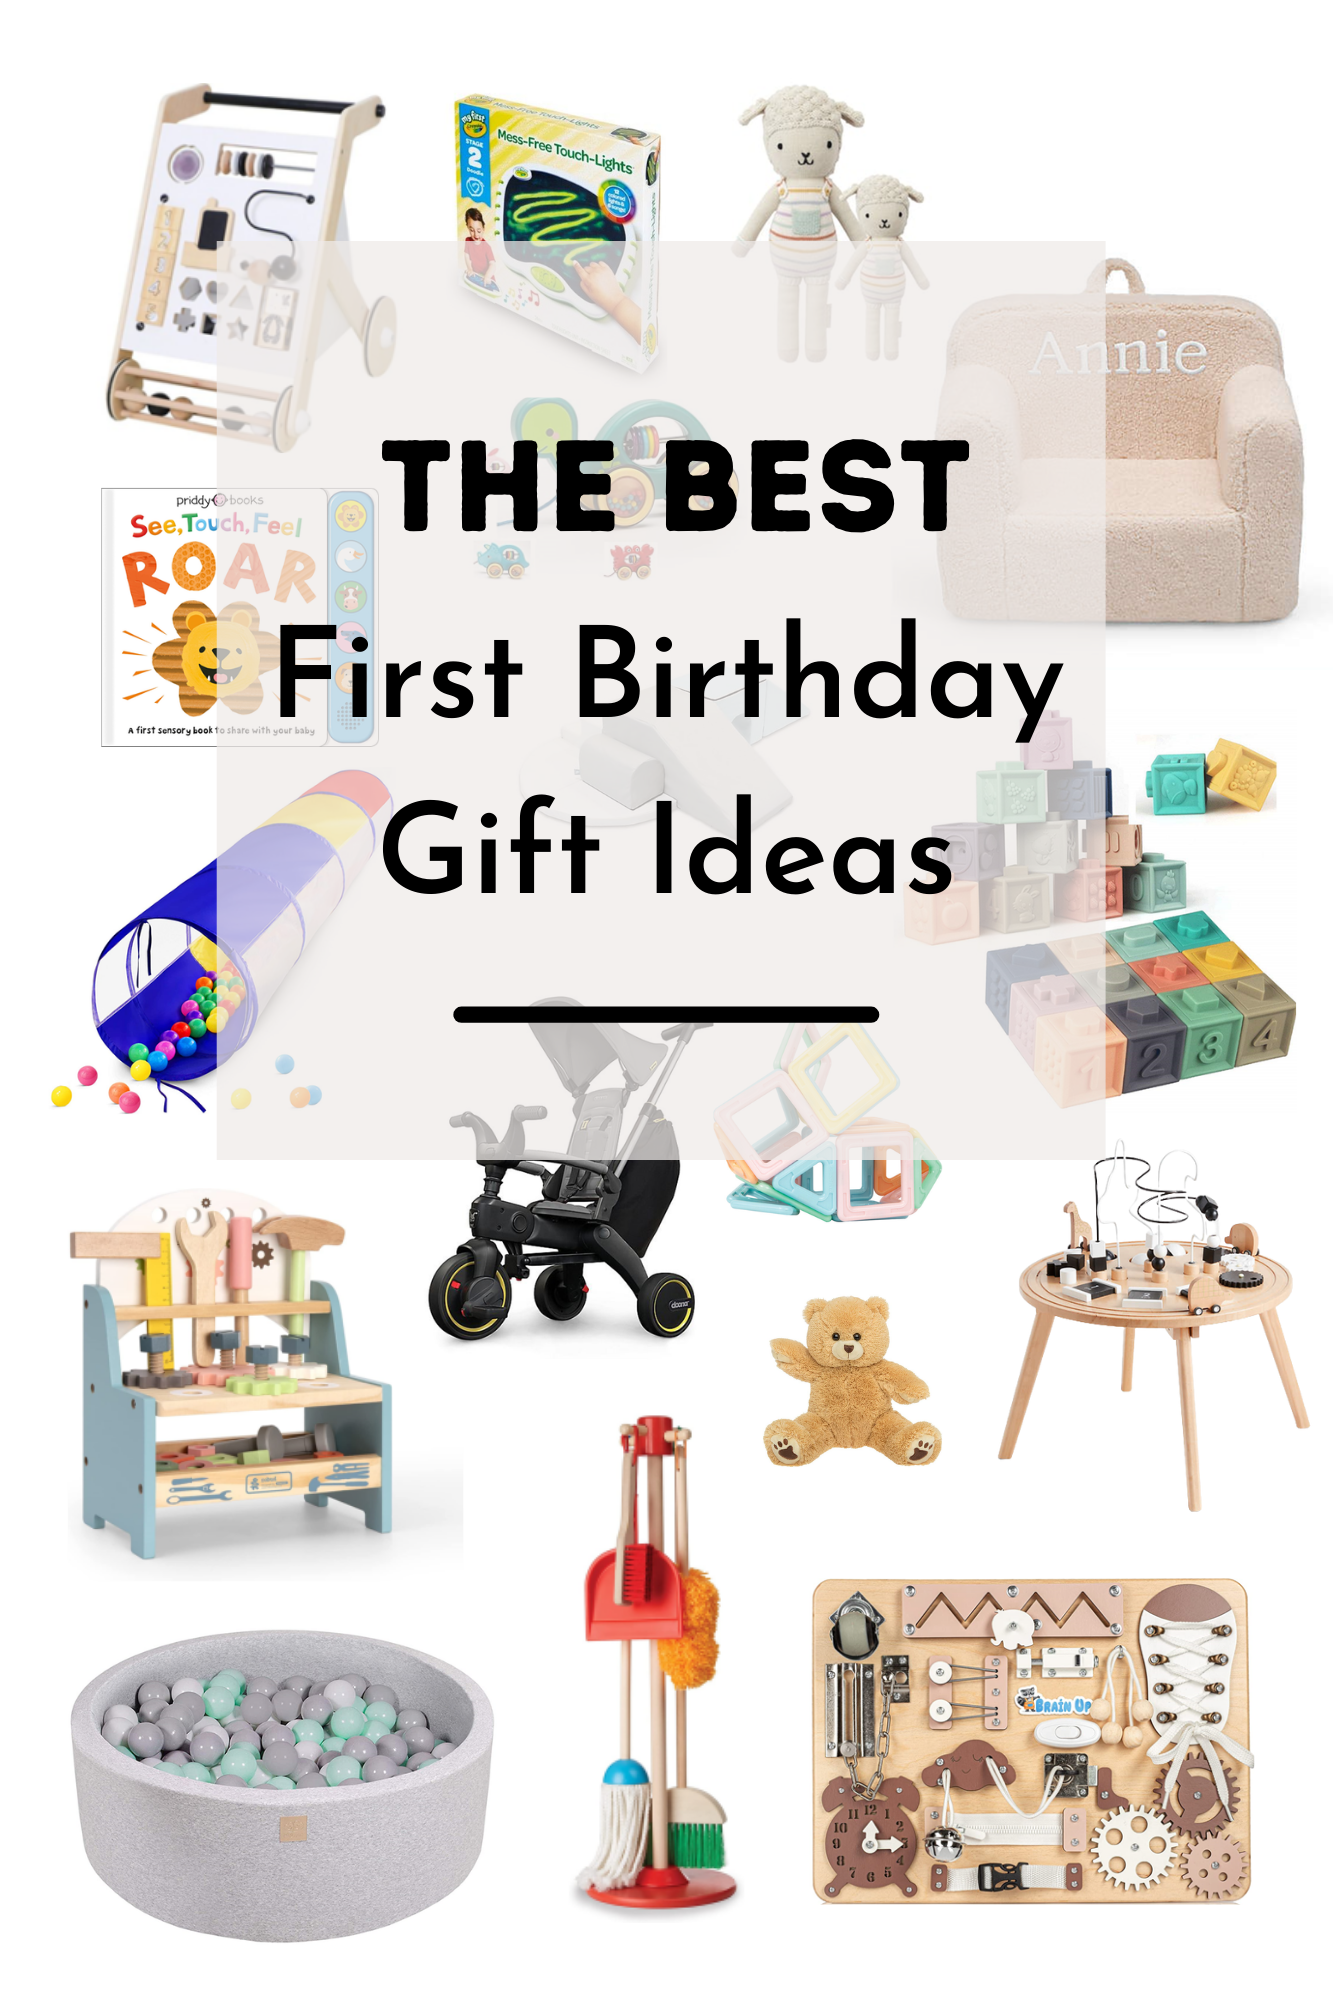 One Year Old Birthday Gifts for Girls * Moms and Crafters